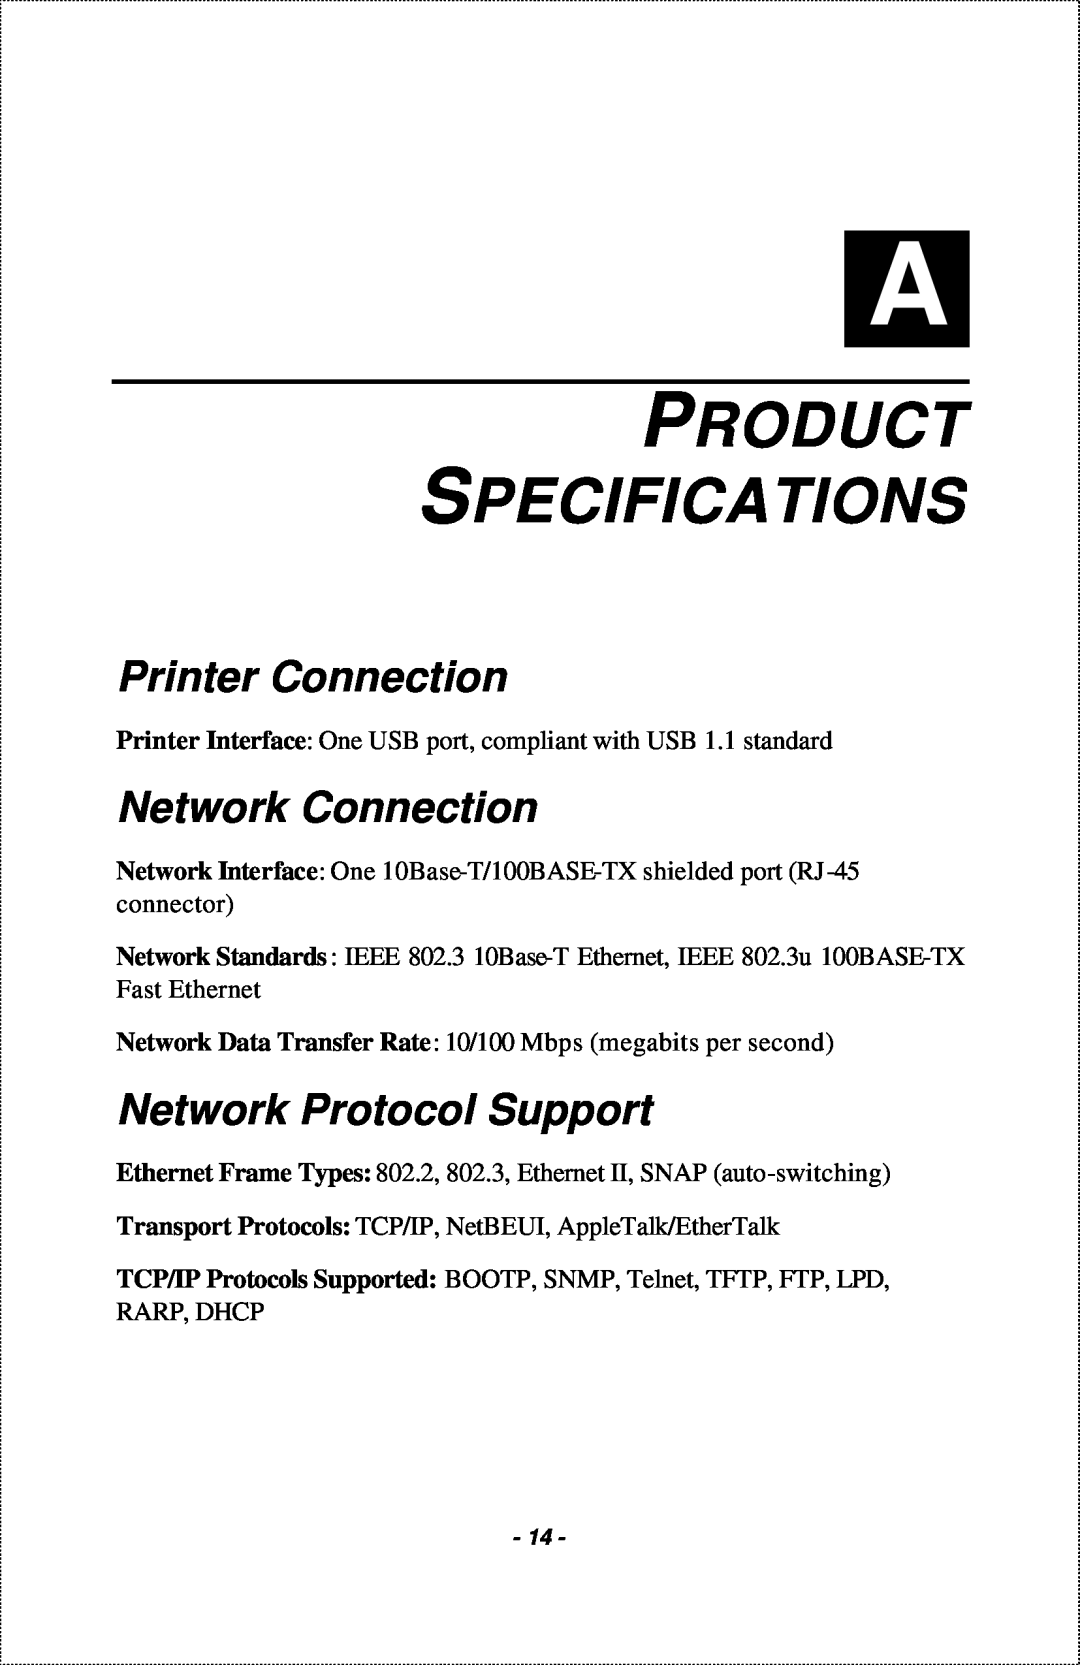 IBM 1-Port USB Print Server manual Product Specifications, Printer Connection, Network Connection, Network Protocol Support 